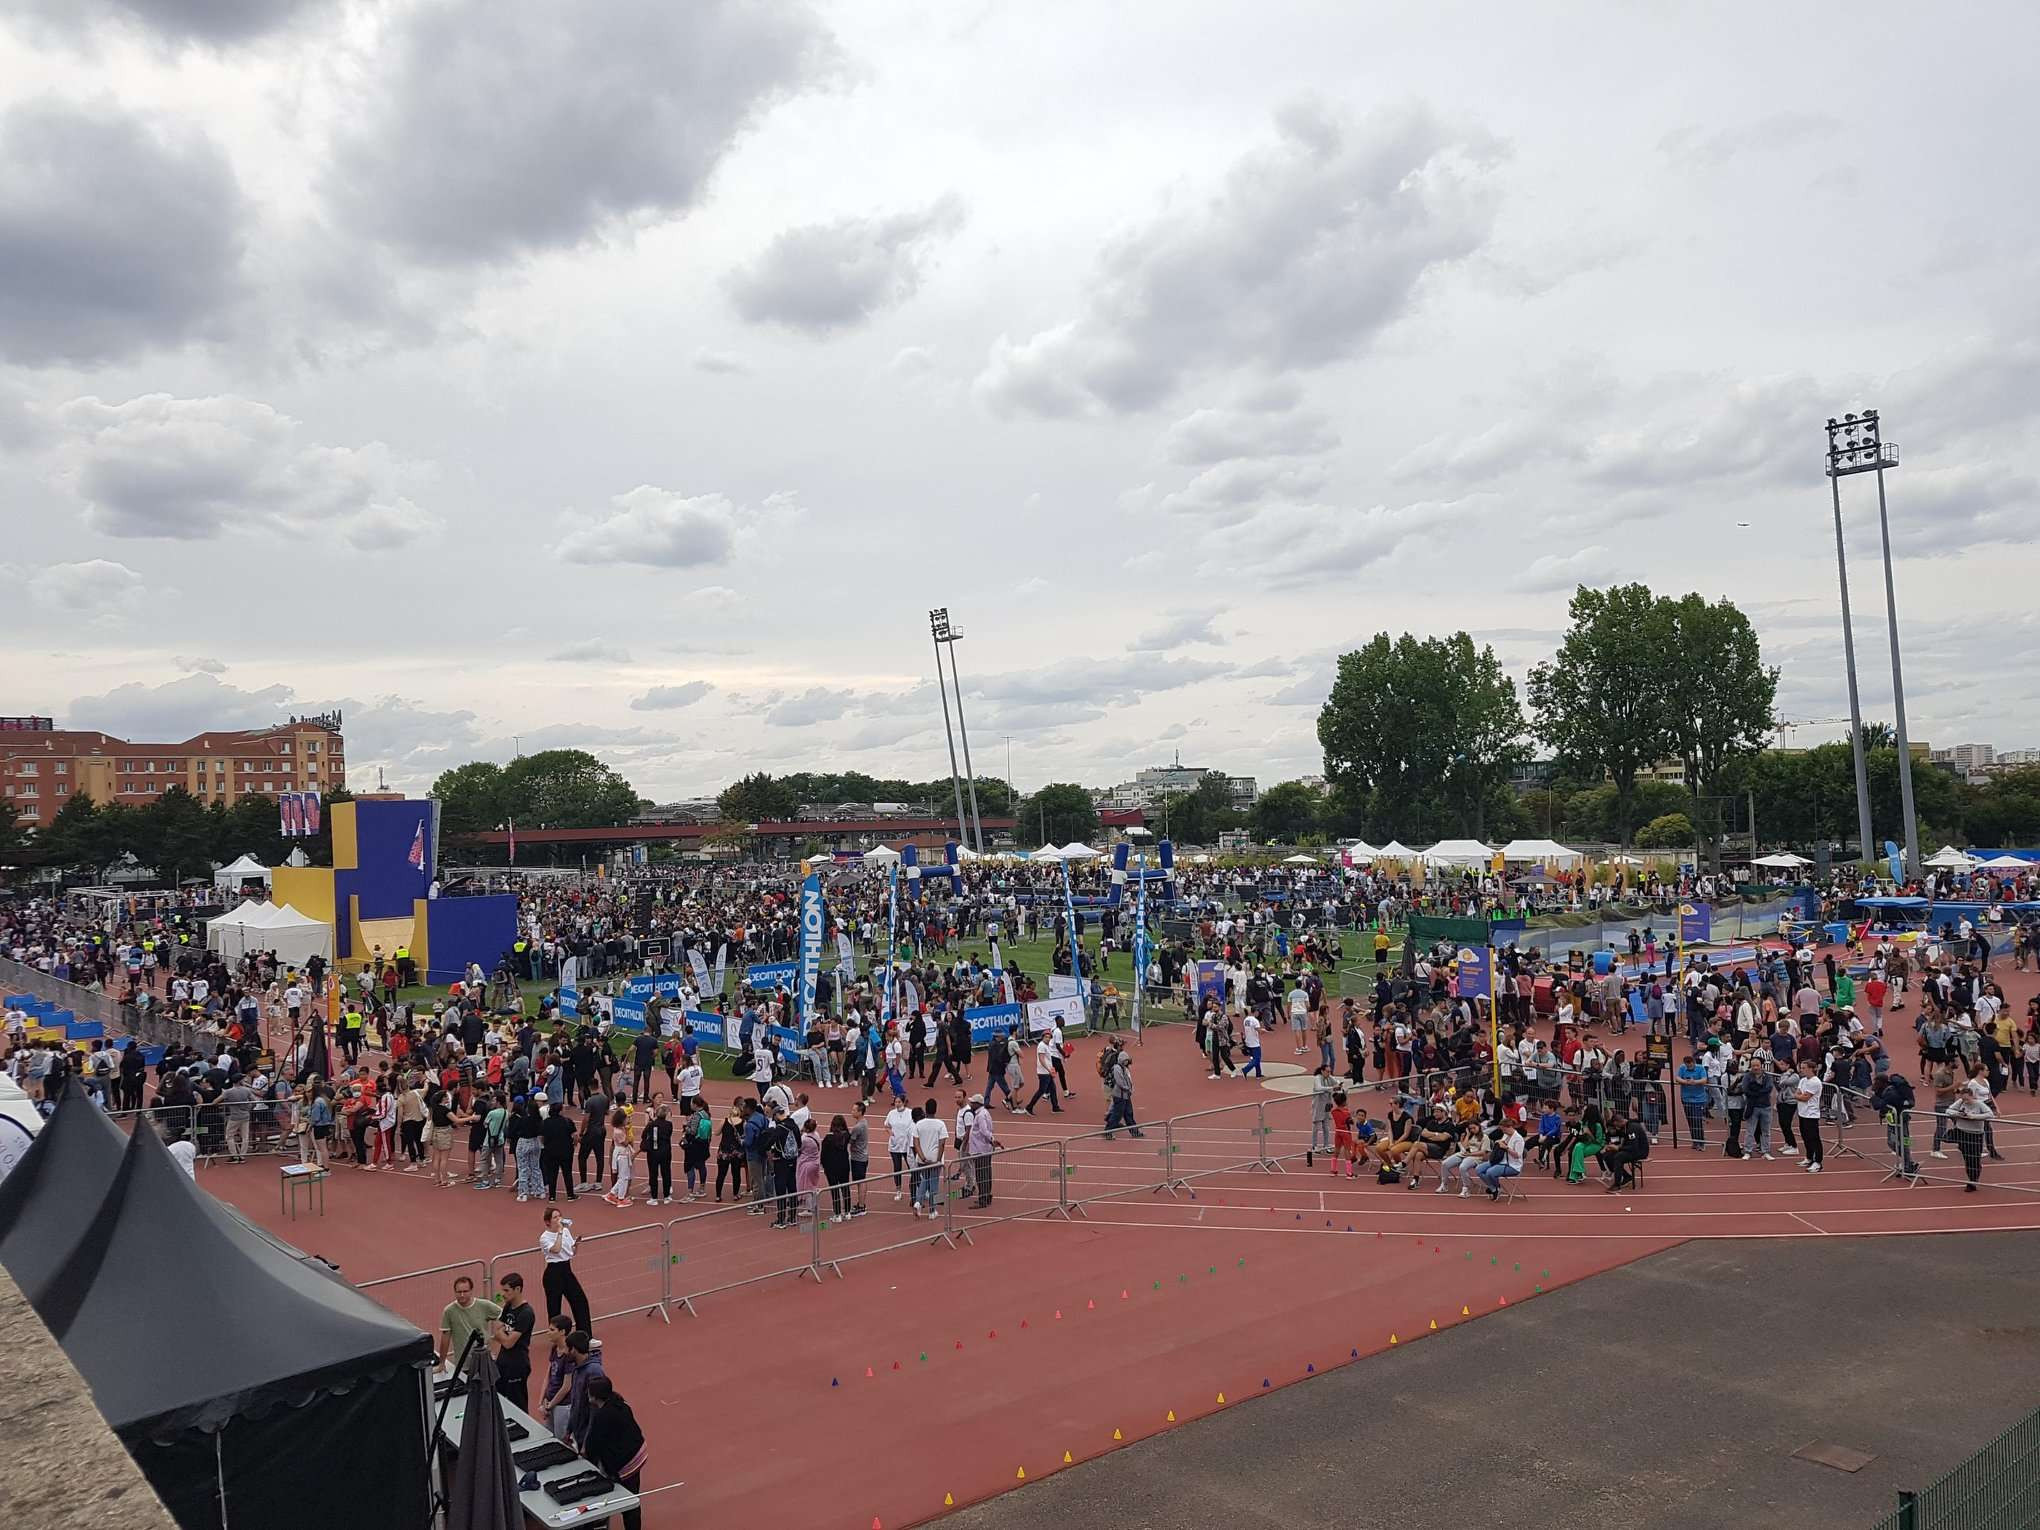 The public gathered in their thousands to attend the Paris 2024 Olympic Day event ©ITG